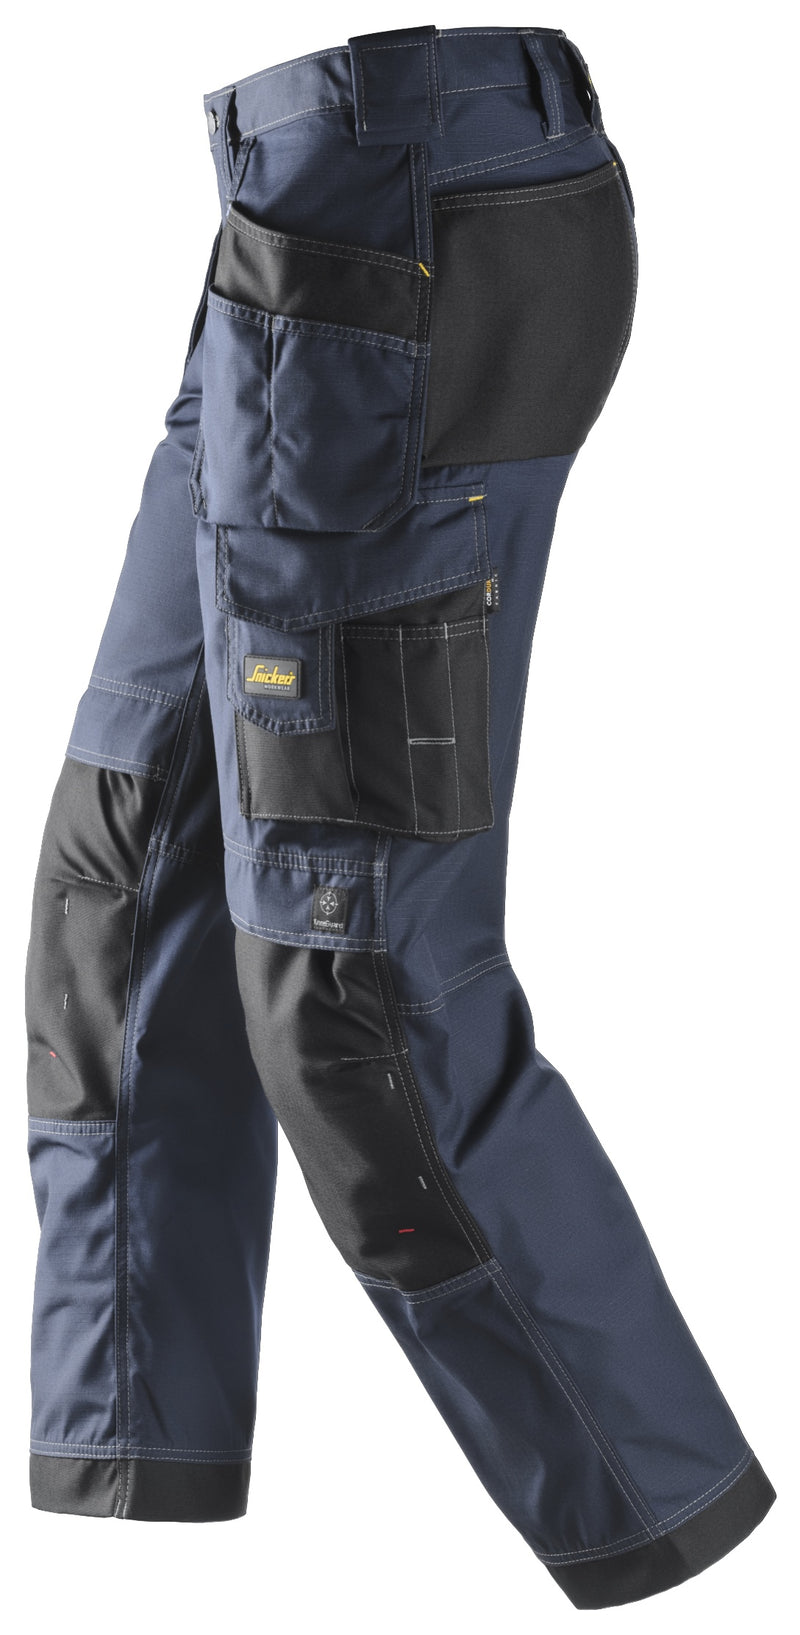 Snickers Craftsman Holster Pockets Trousers Rip-Stop, Navy/Black, Size 152